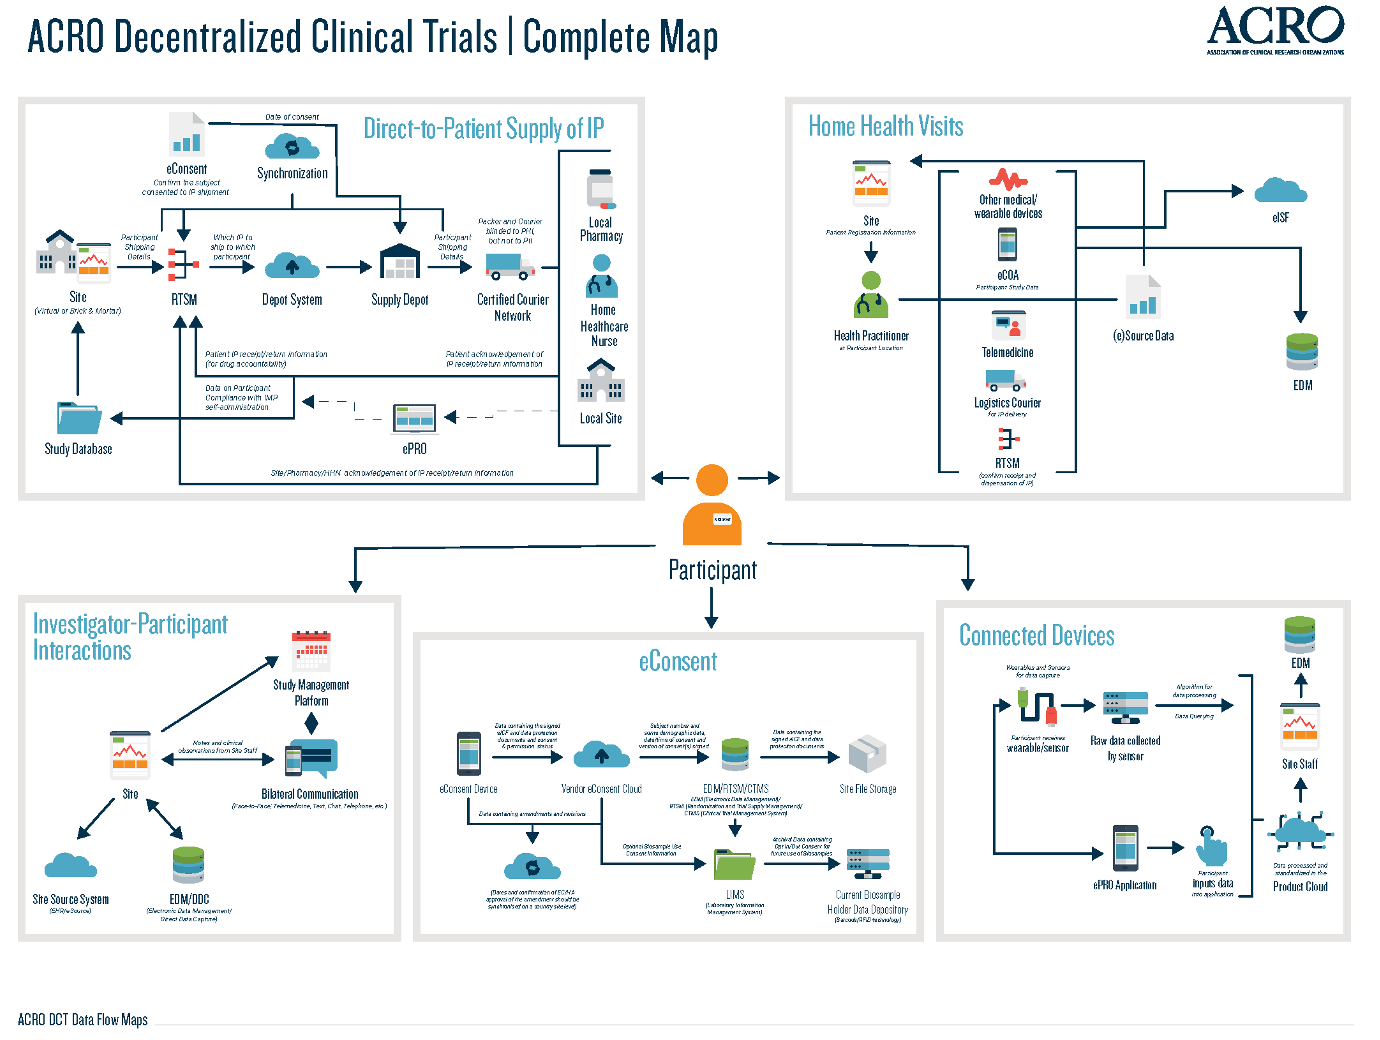 Figure. Mapping a decentralized clinical trial2

Source: Used with permission, ACRO DCT Data Flow Map